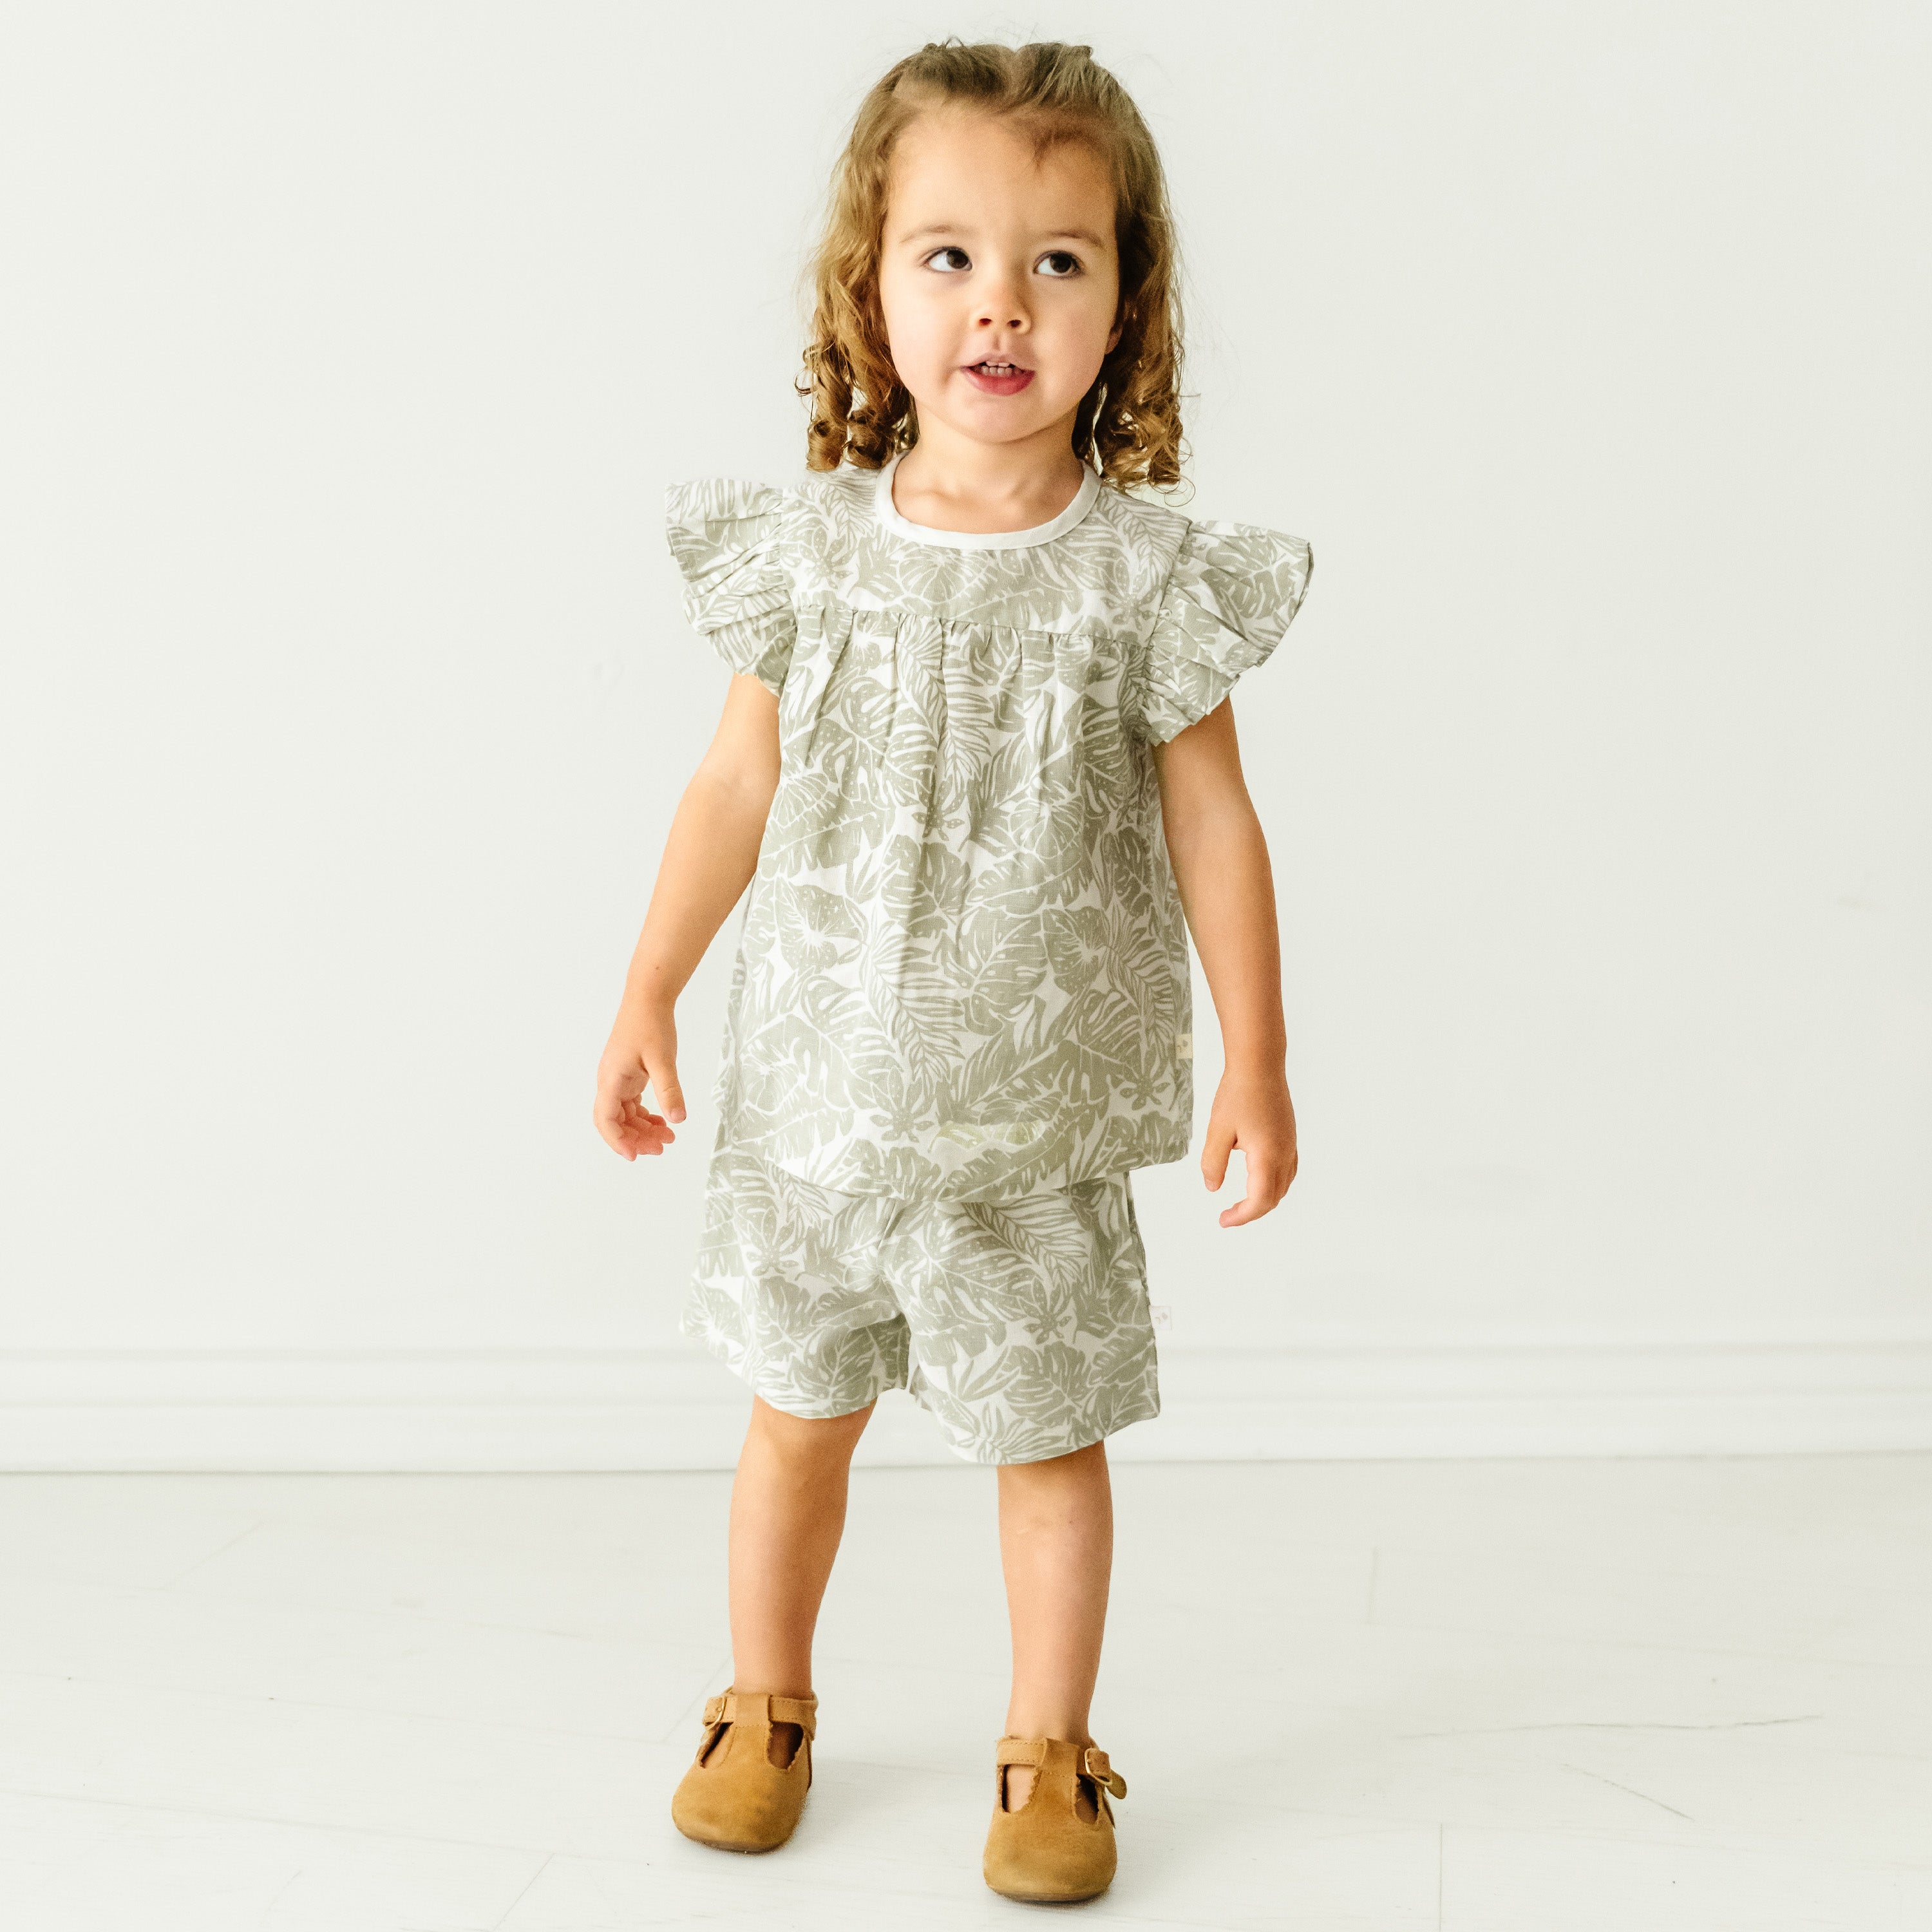 A toddler boy with curly hair stands smiling in a Makemake Organics Organic Linen Flutter Top and Shorts - Palms and tan shoes against a plain white background.